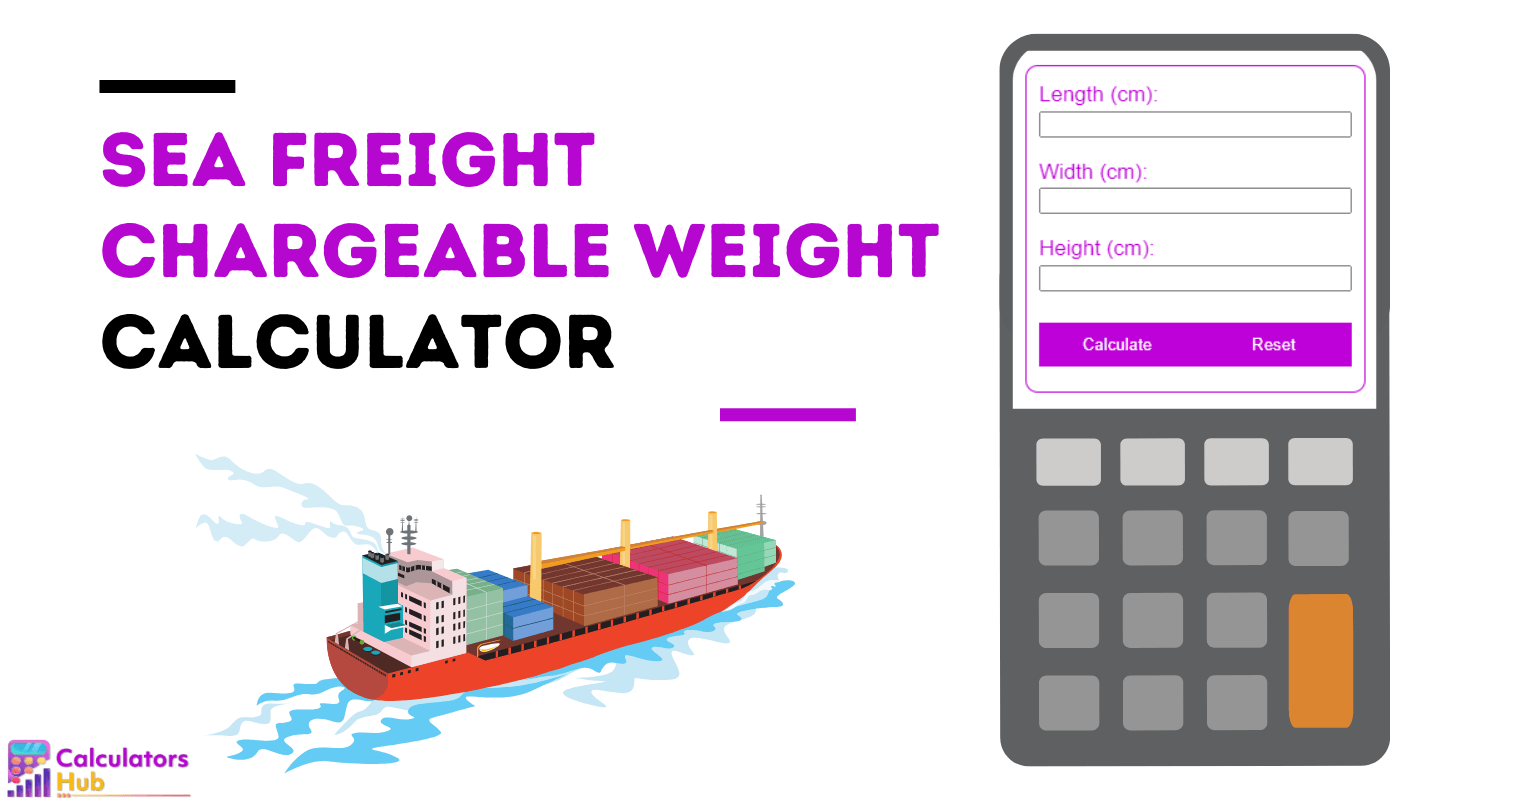 Sea Freight Chargeable Weight Calculator